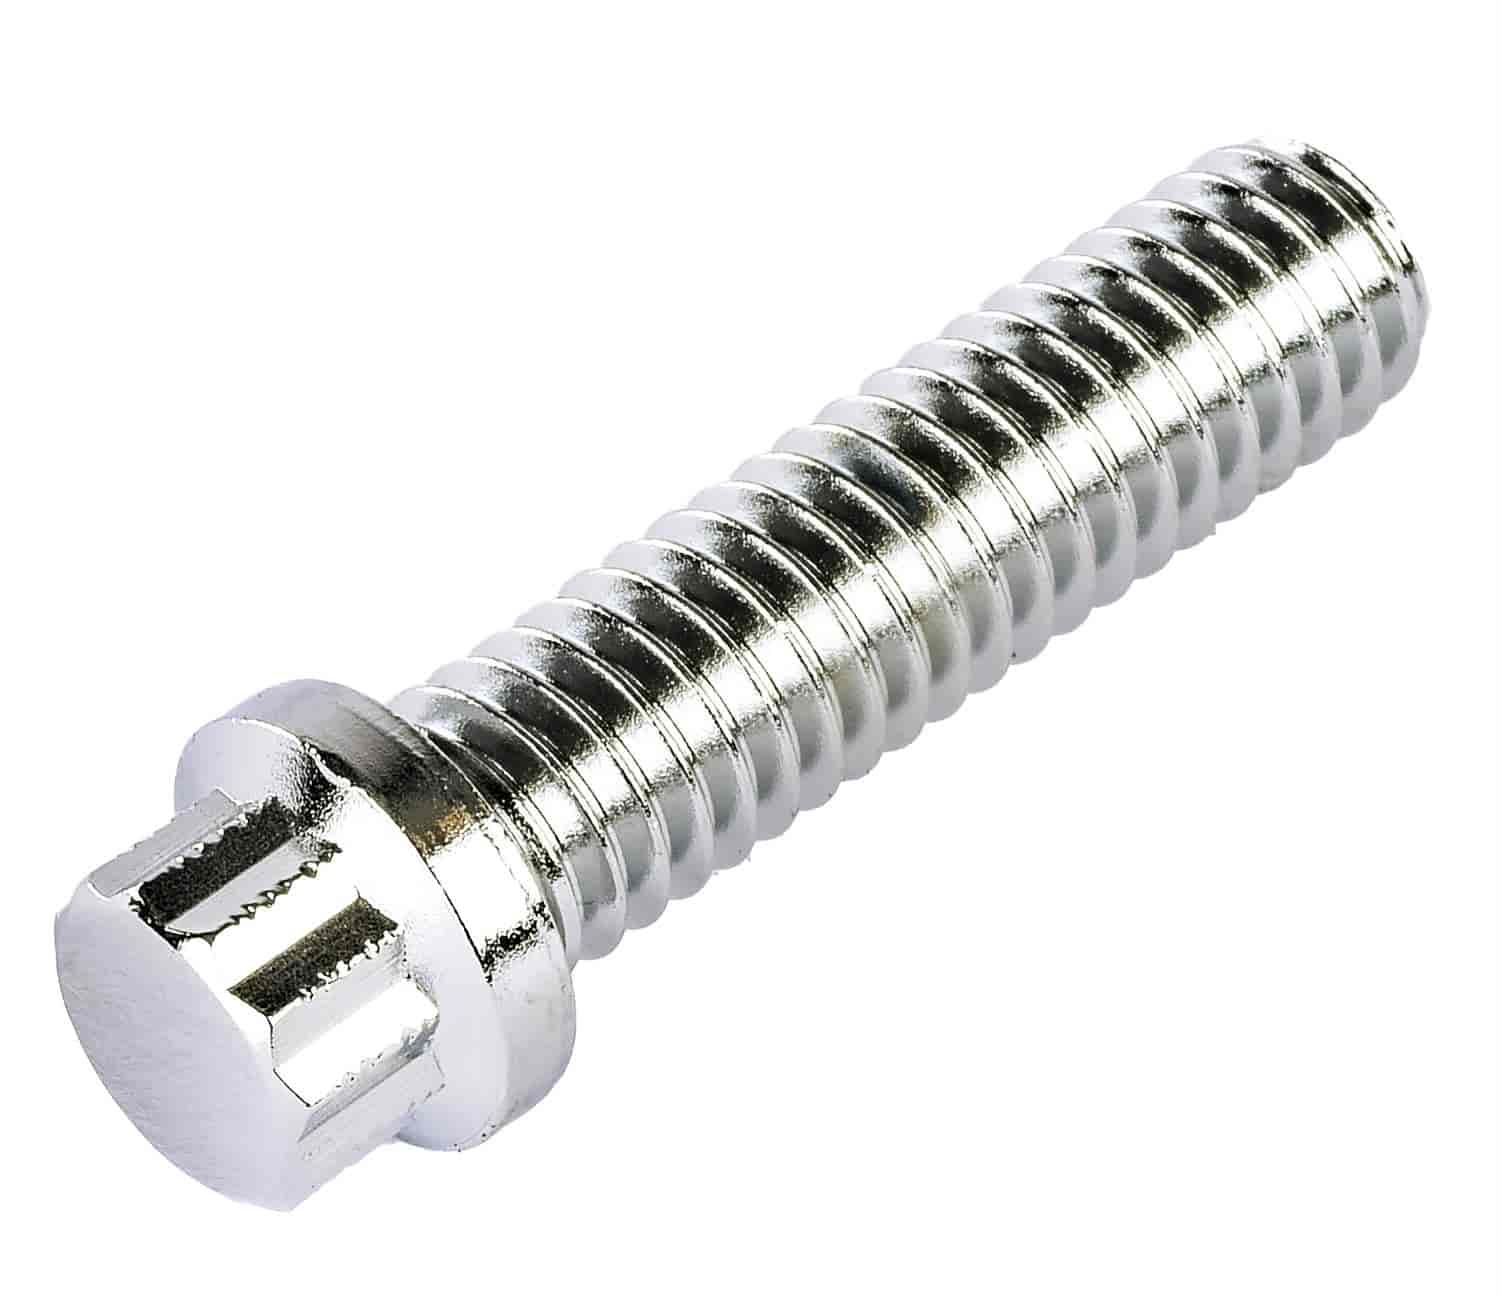 12-Point Fastener [5/16 in. -18 Thread x 1 1/4 (.250) in. Length]